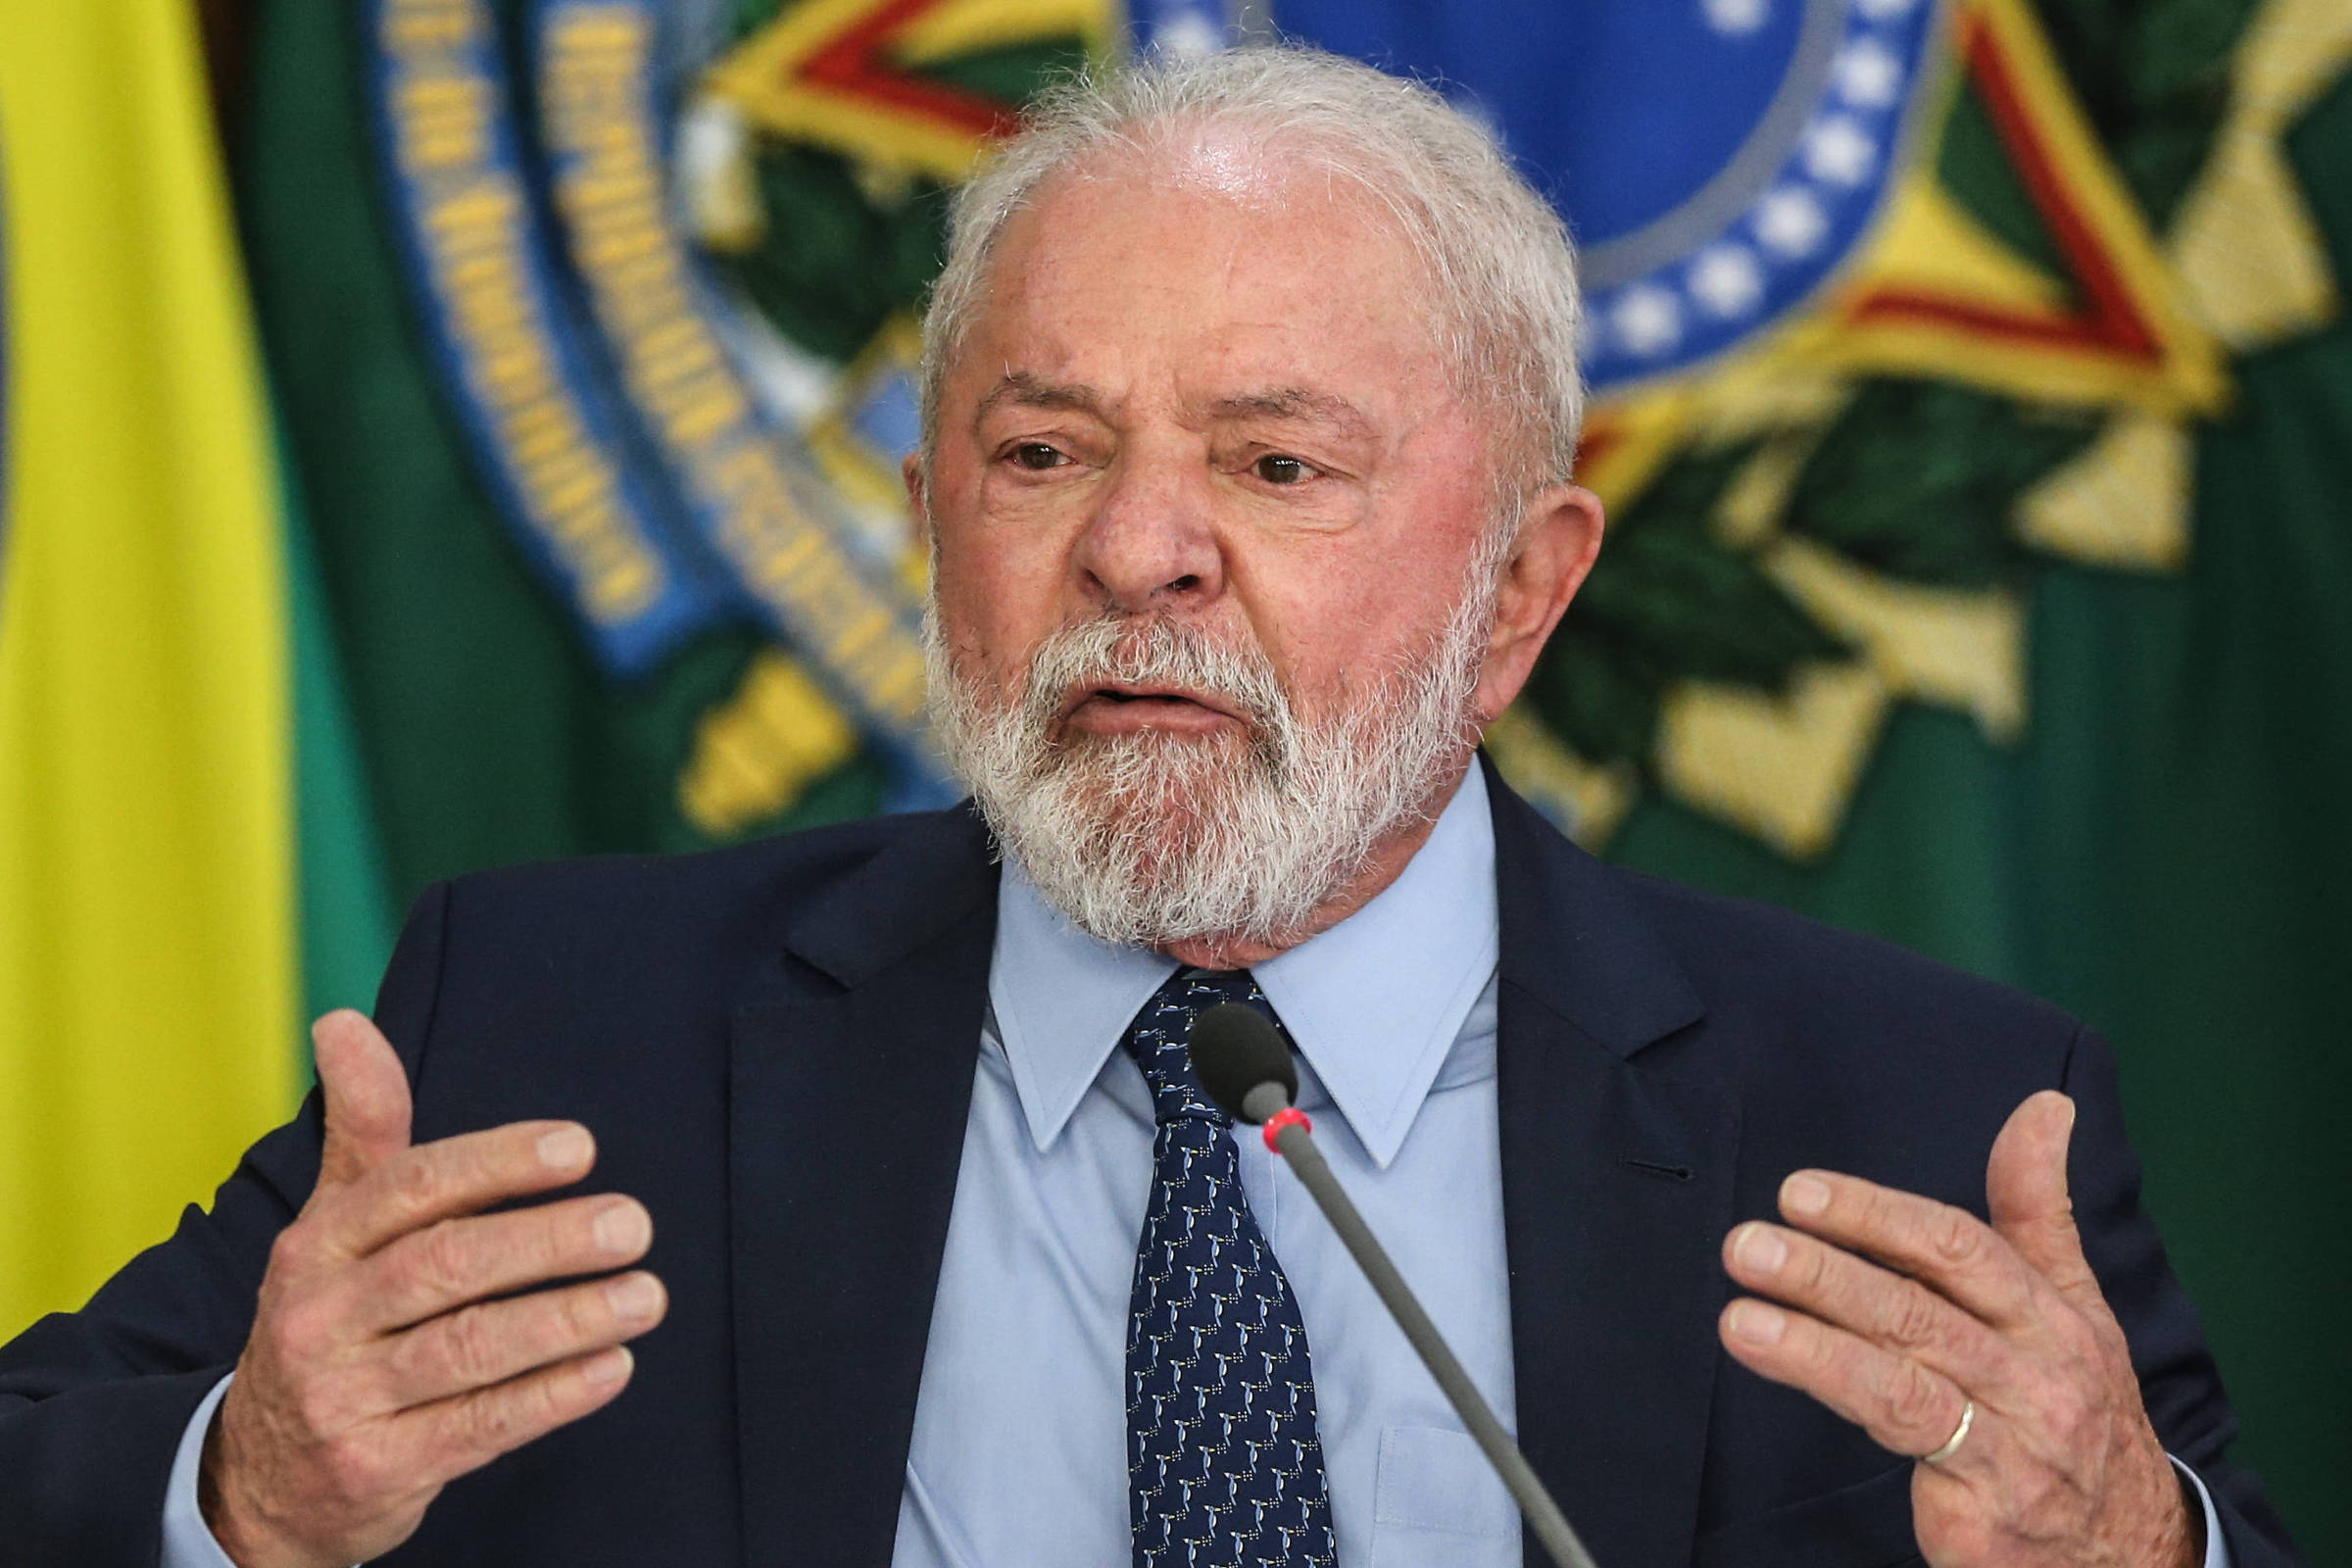 Lula scolds ministers who divulge ‘genius’ without consulting the Planalto – 03/14/2023 – Politics